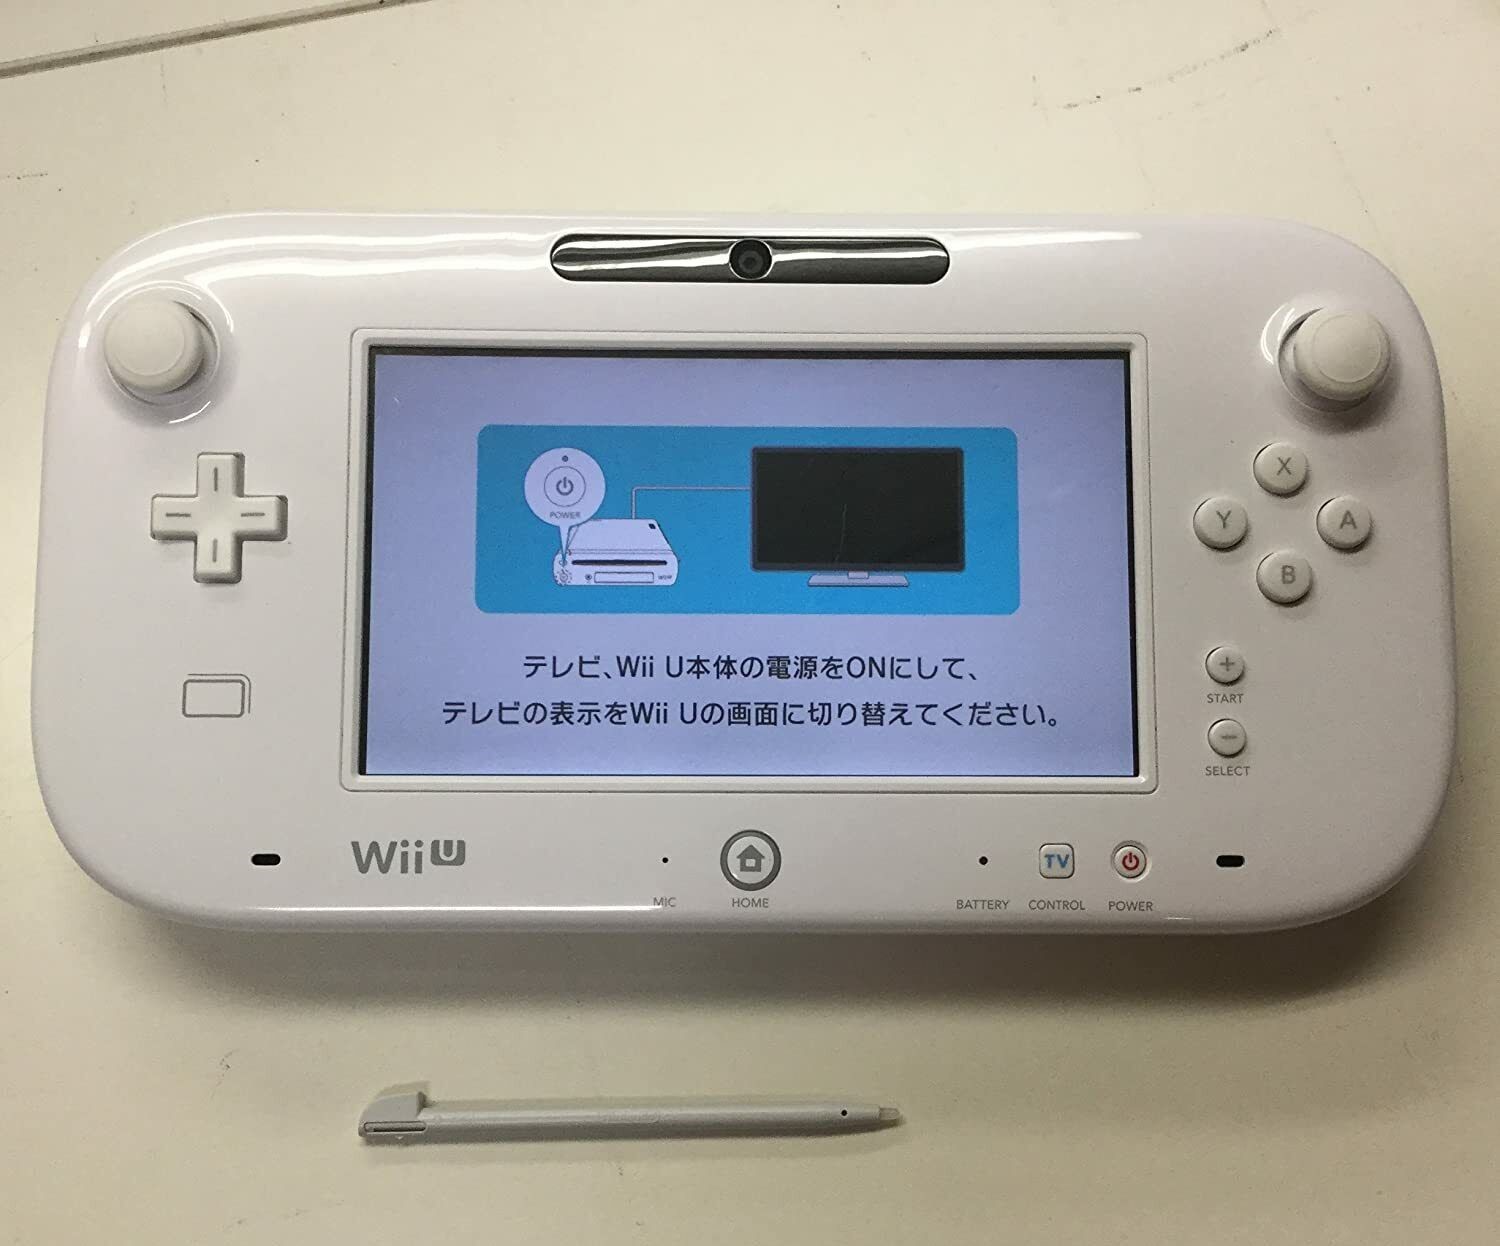 wii-u-stylus-search-locating-the-interactive-tool